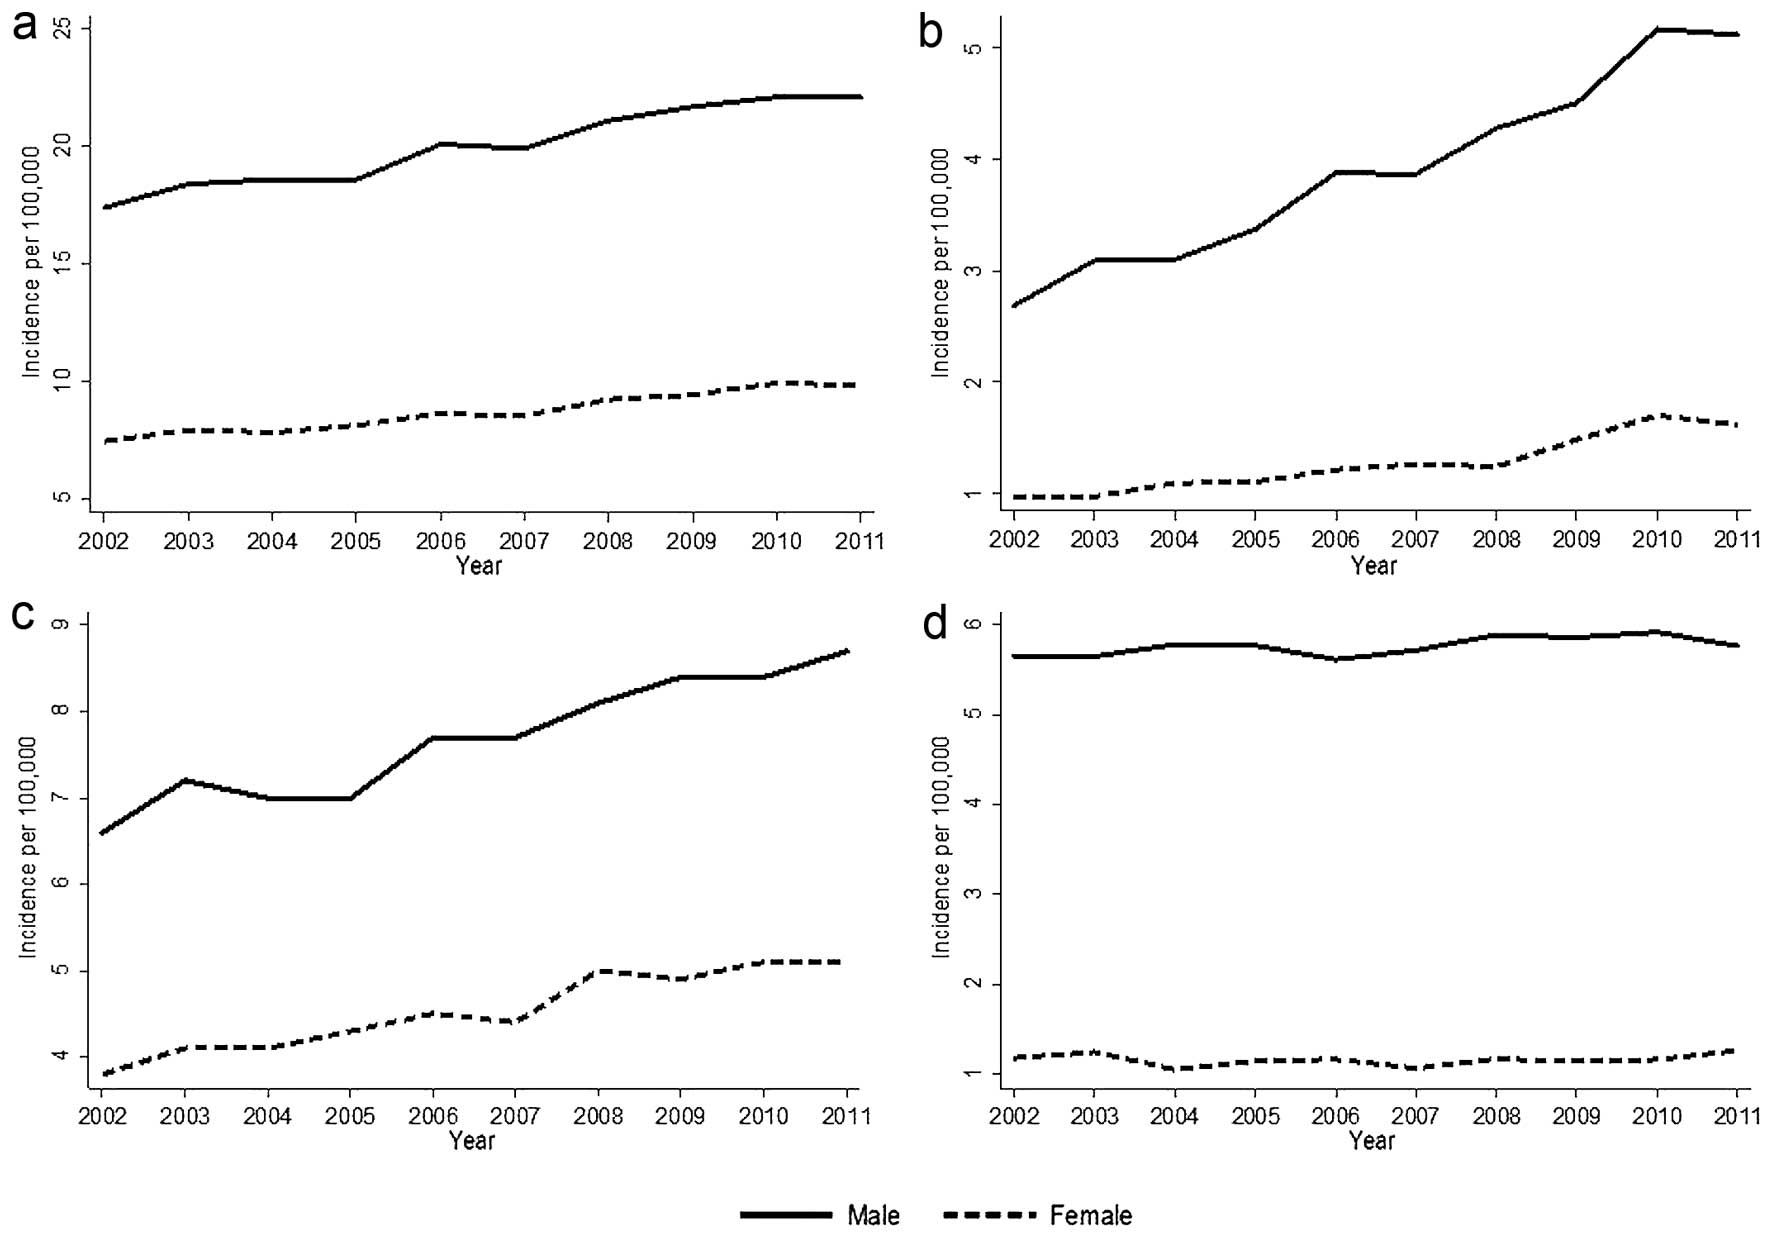 Hpv oropharyngeal cancer incidence, Study of human papillomavirus and oropharyngeal cancer